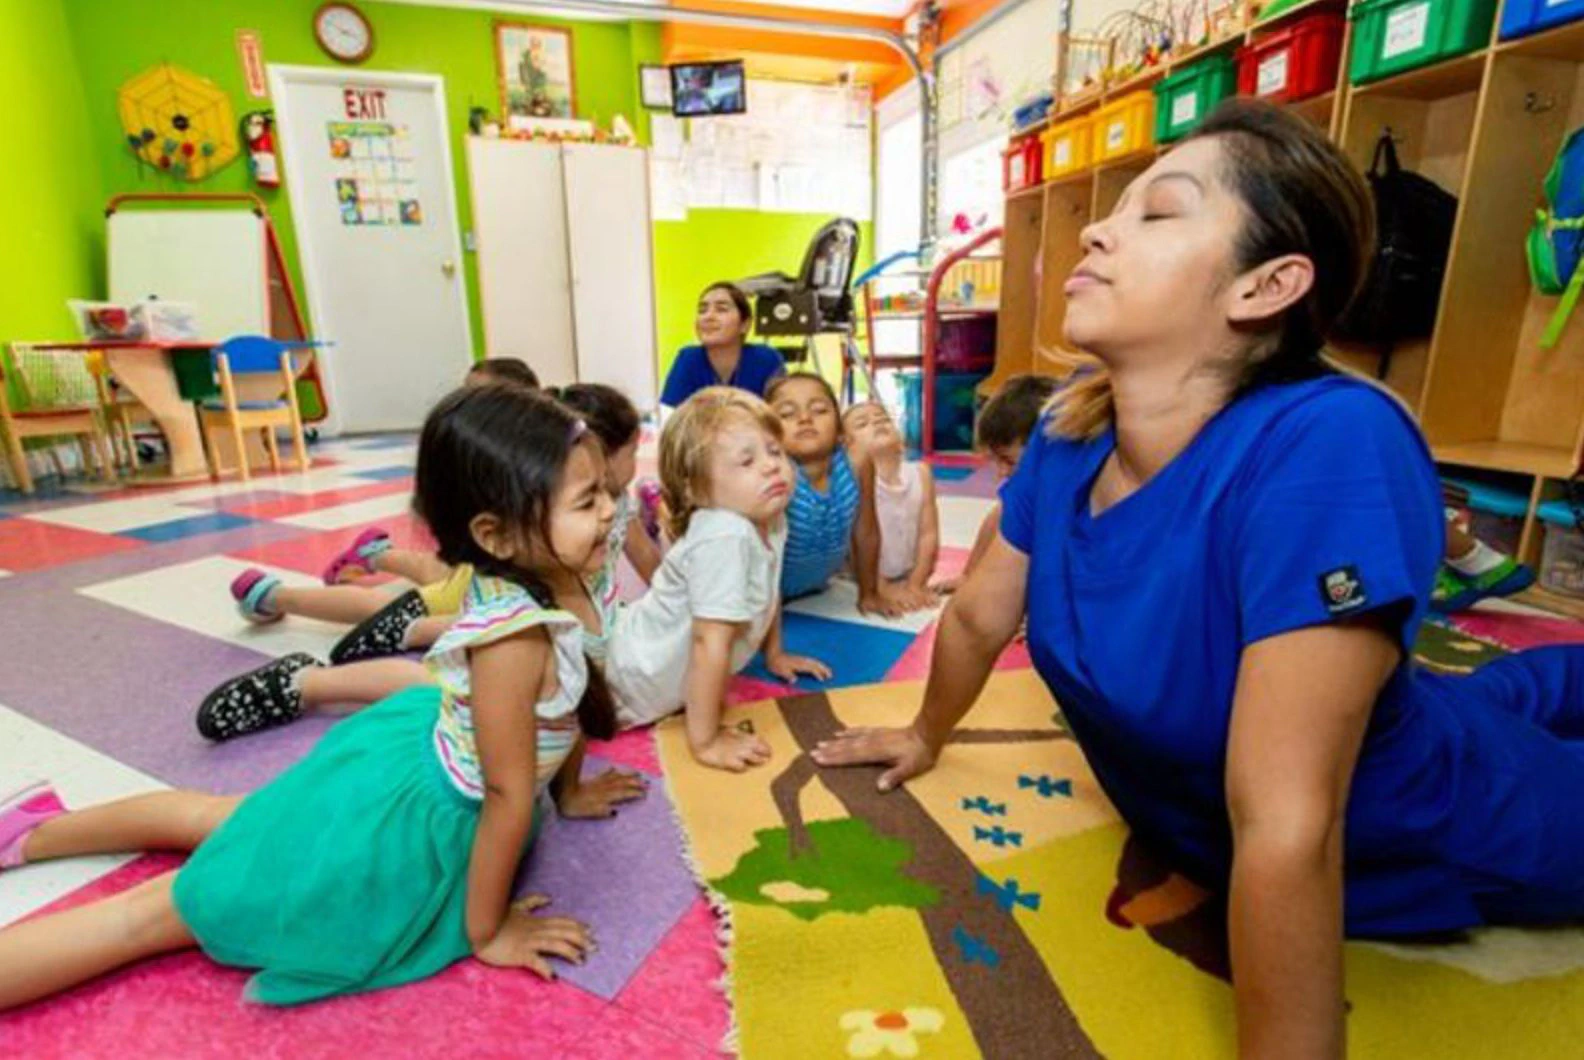 Upwards childcare provider Tanya Garcia leads children in healthy activities such as yoga.